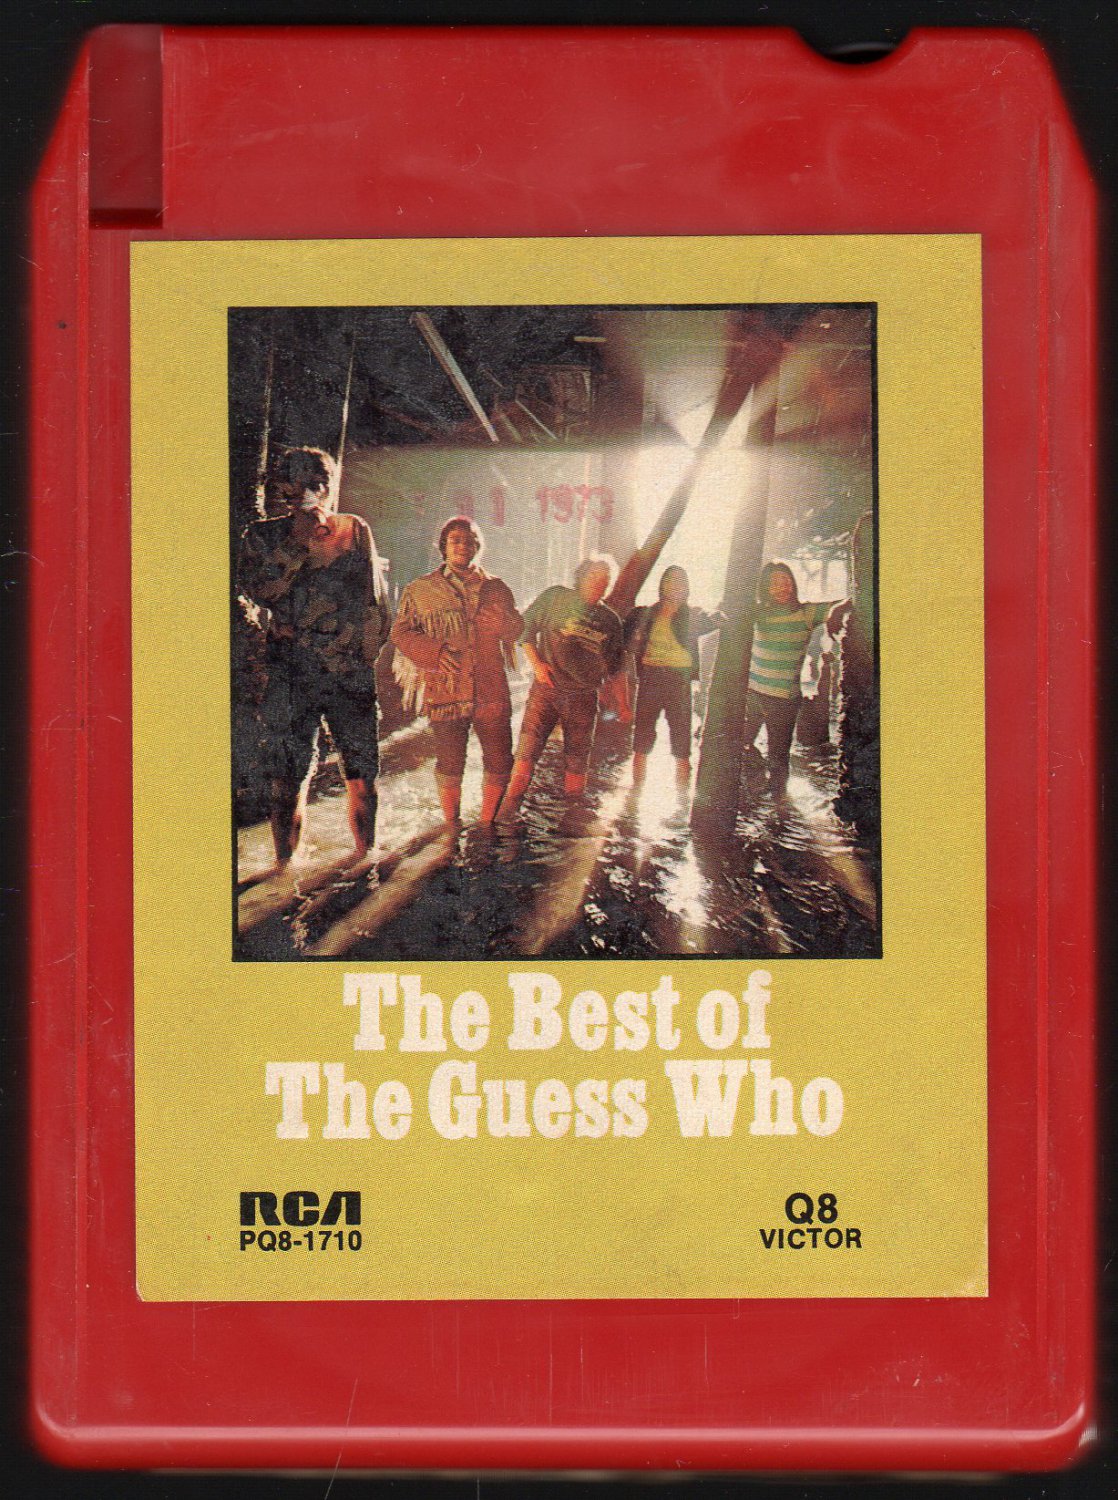 The Guess Who The Best Of 1971 Rca Quadraphonic Ac3 Sold 8 Track Tape 